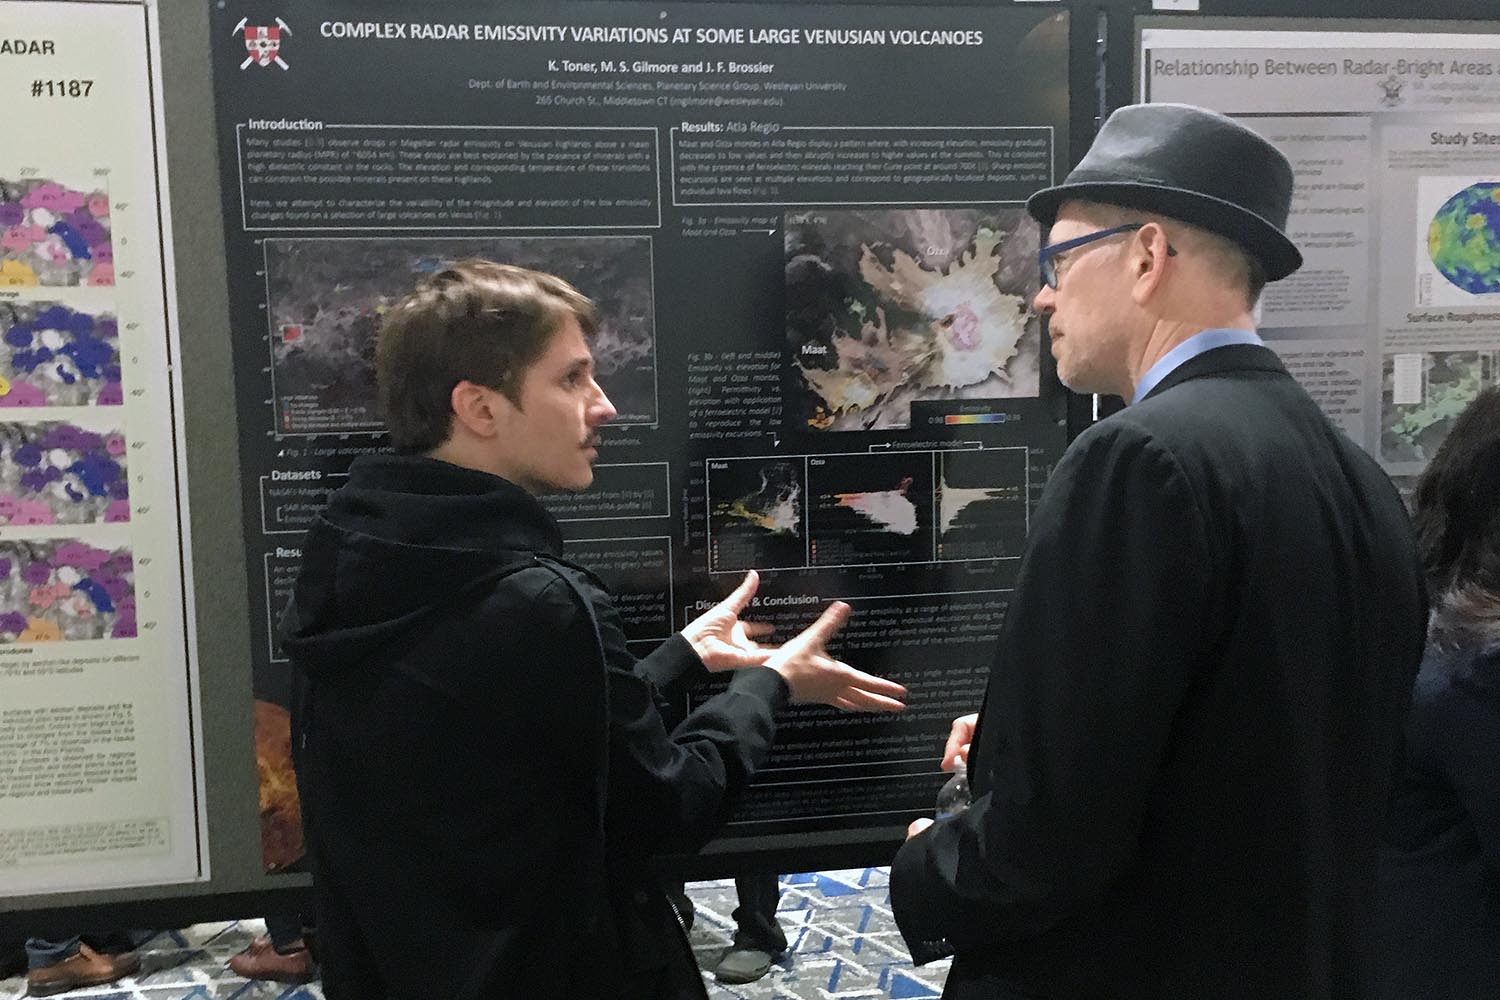 Jeremy Brossier presented a talk titled "Radiophysical Behaviors of Venus’ Plateaus and Volcanic Rises: Updated Assessment." He also presented a poster titled "Complex Radar Emissivity Variations at Some Large Venusian Volcanoes."